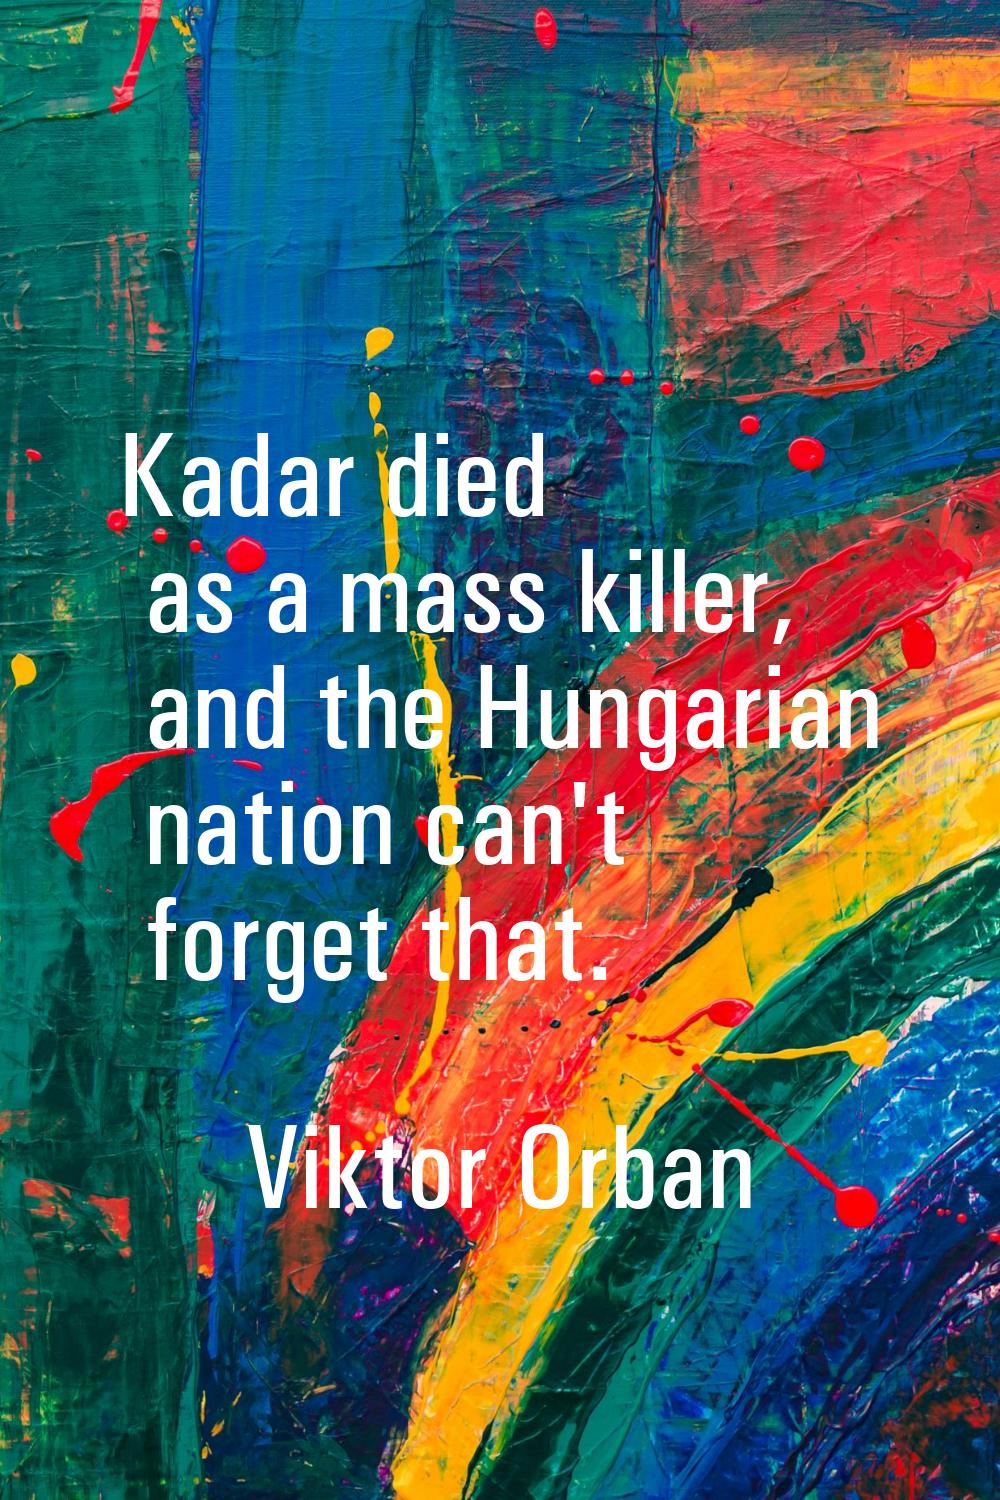 Kadar died as a mass killer, and the Hungarian nation can't forget that.